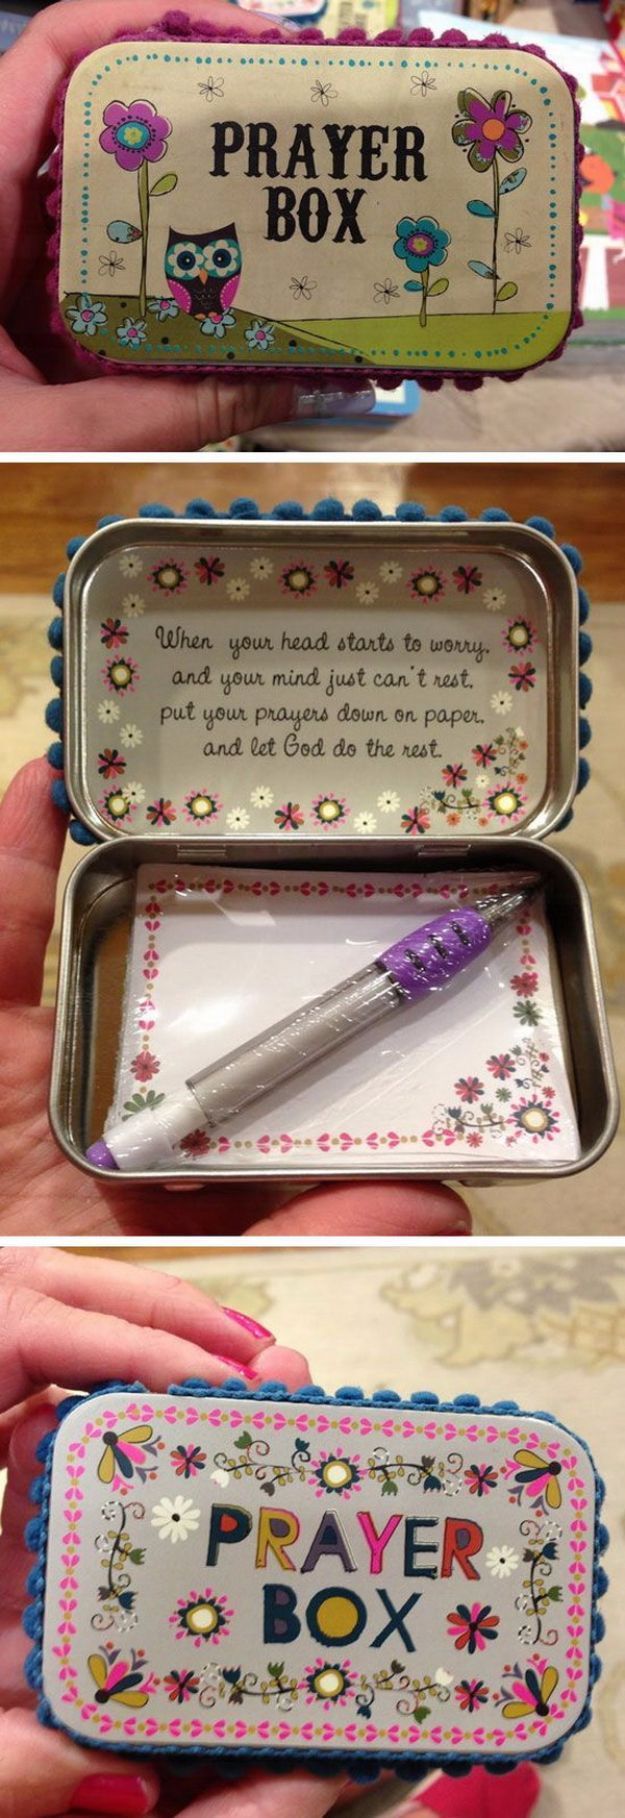 DIY Gifts for Mom – DIY Altoid Tin Prayer Boxes – Best Craft Projects and Gift Ideas You Can Make for Your Mother – Last Minute